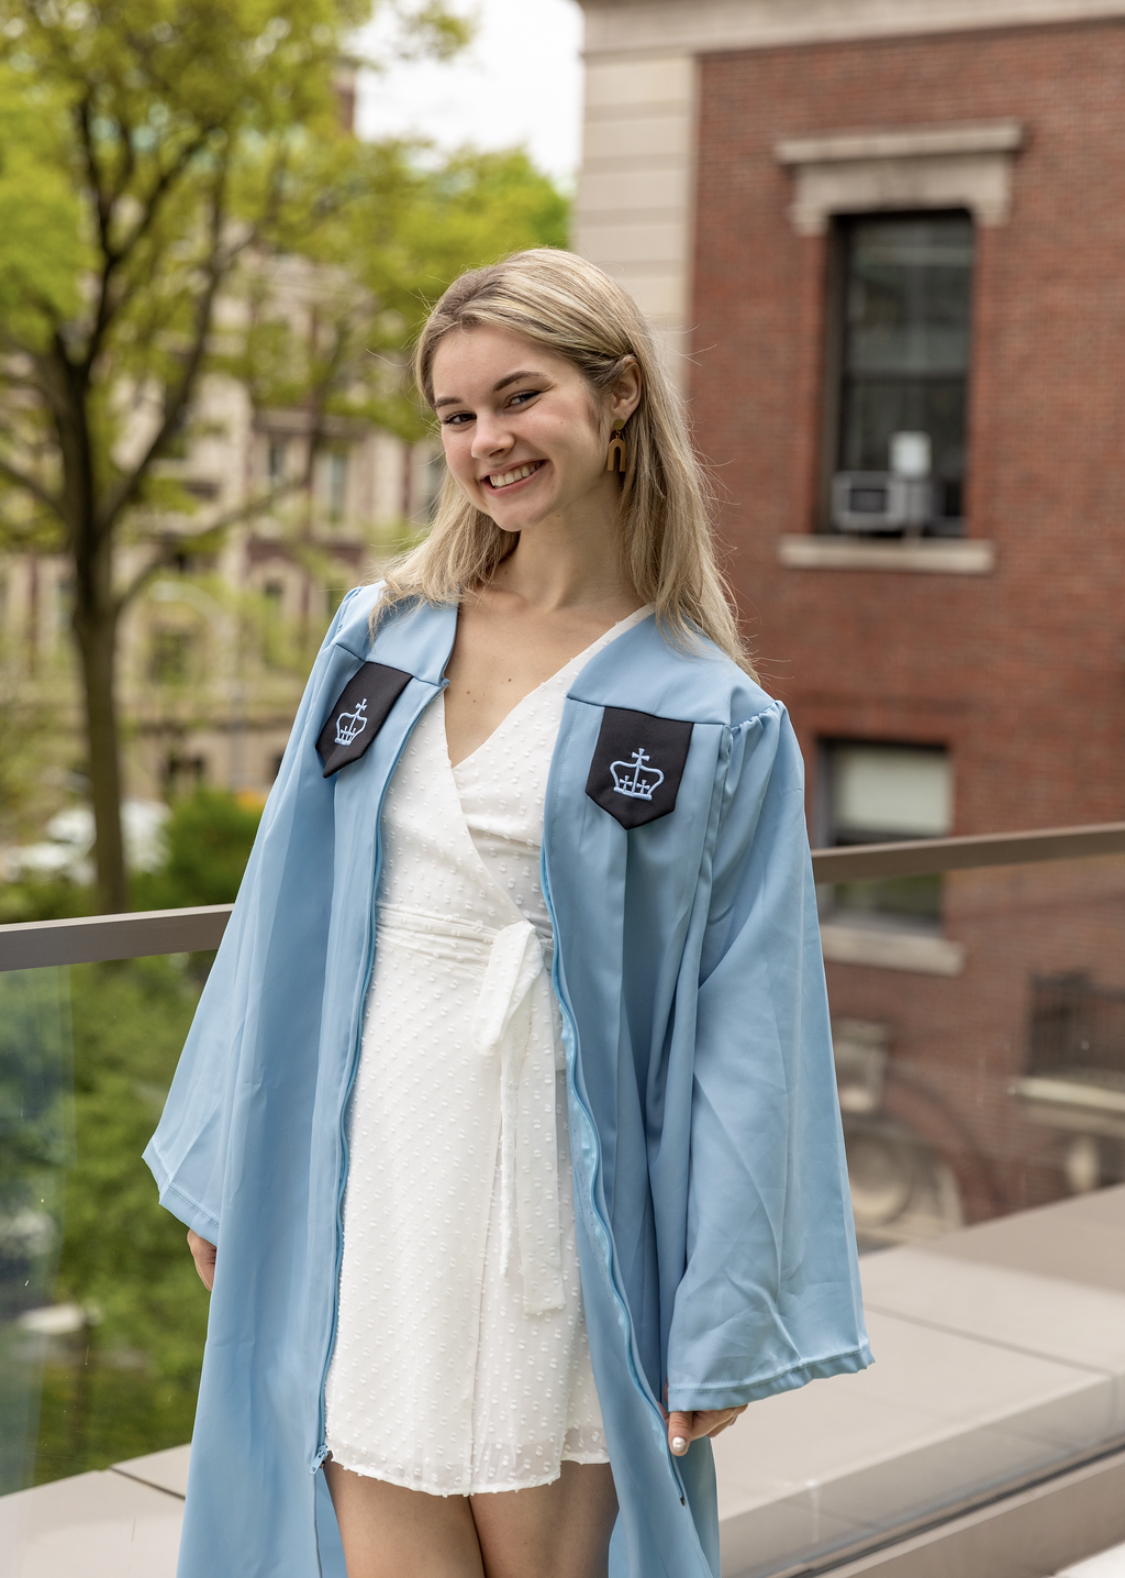 Audrey posing in her graduation gown on Barnard's campus